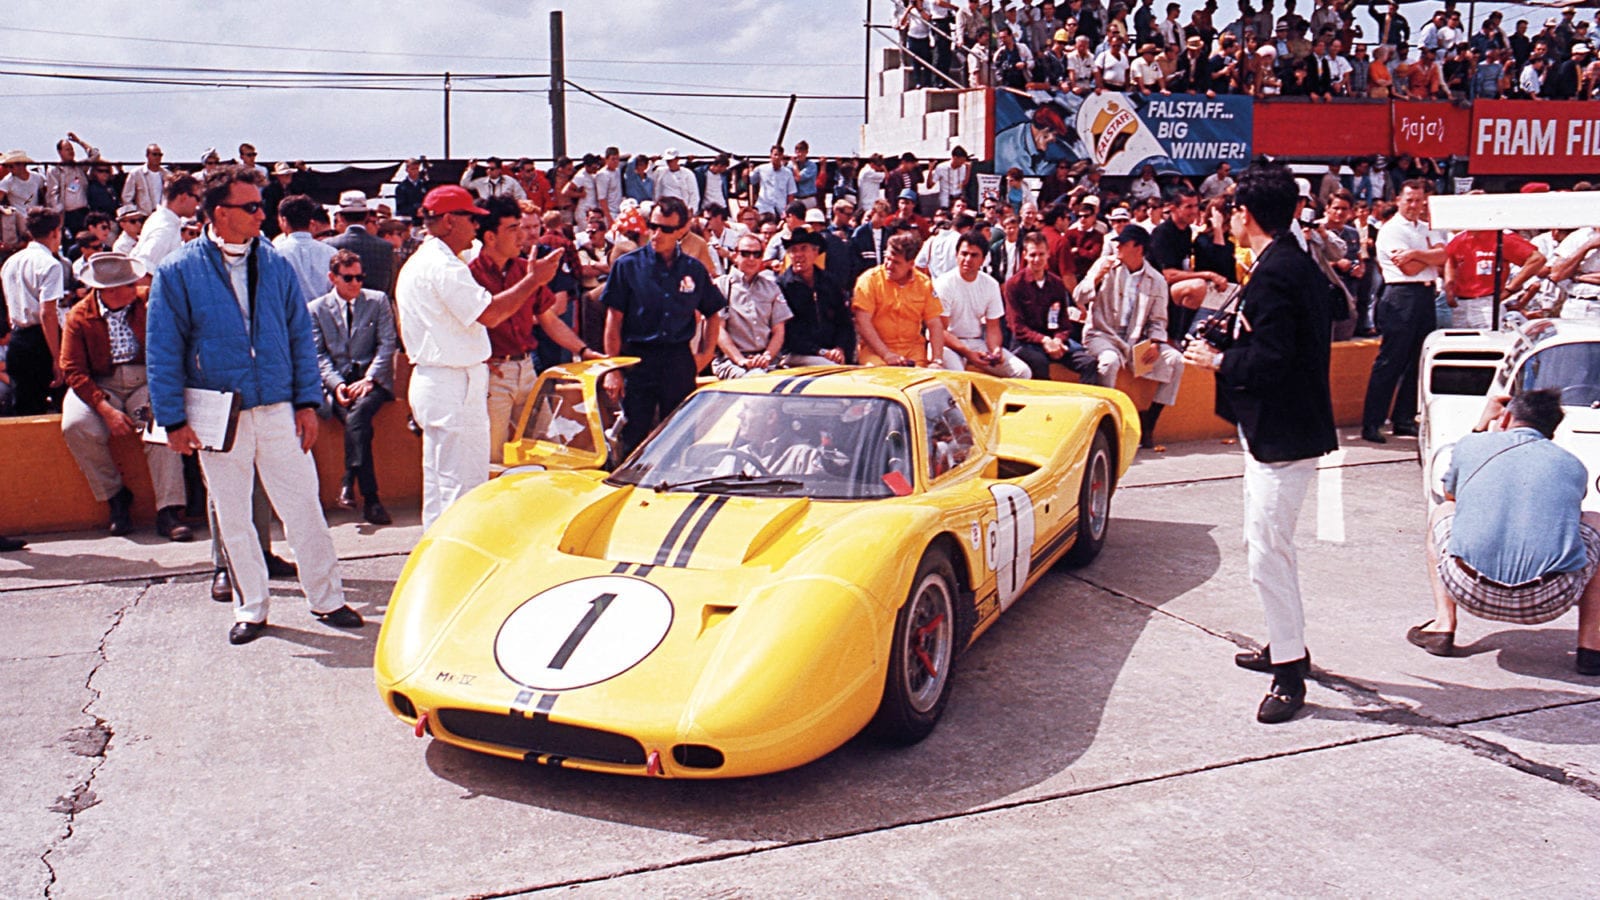 Ford MkIV at Le Mans in 1967